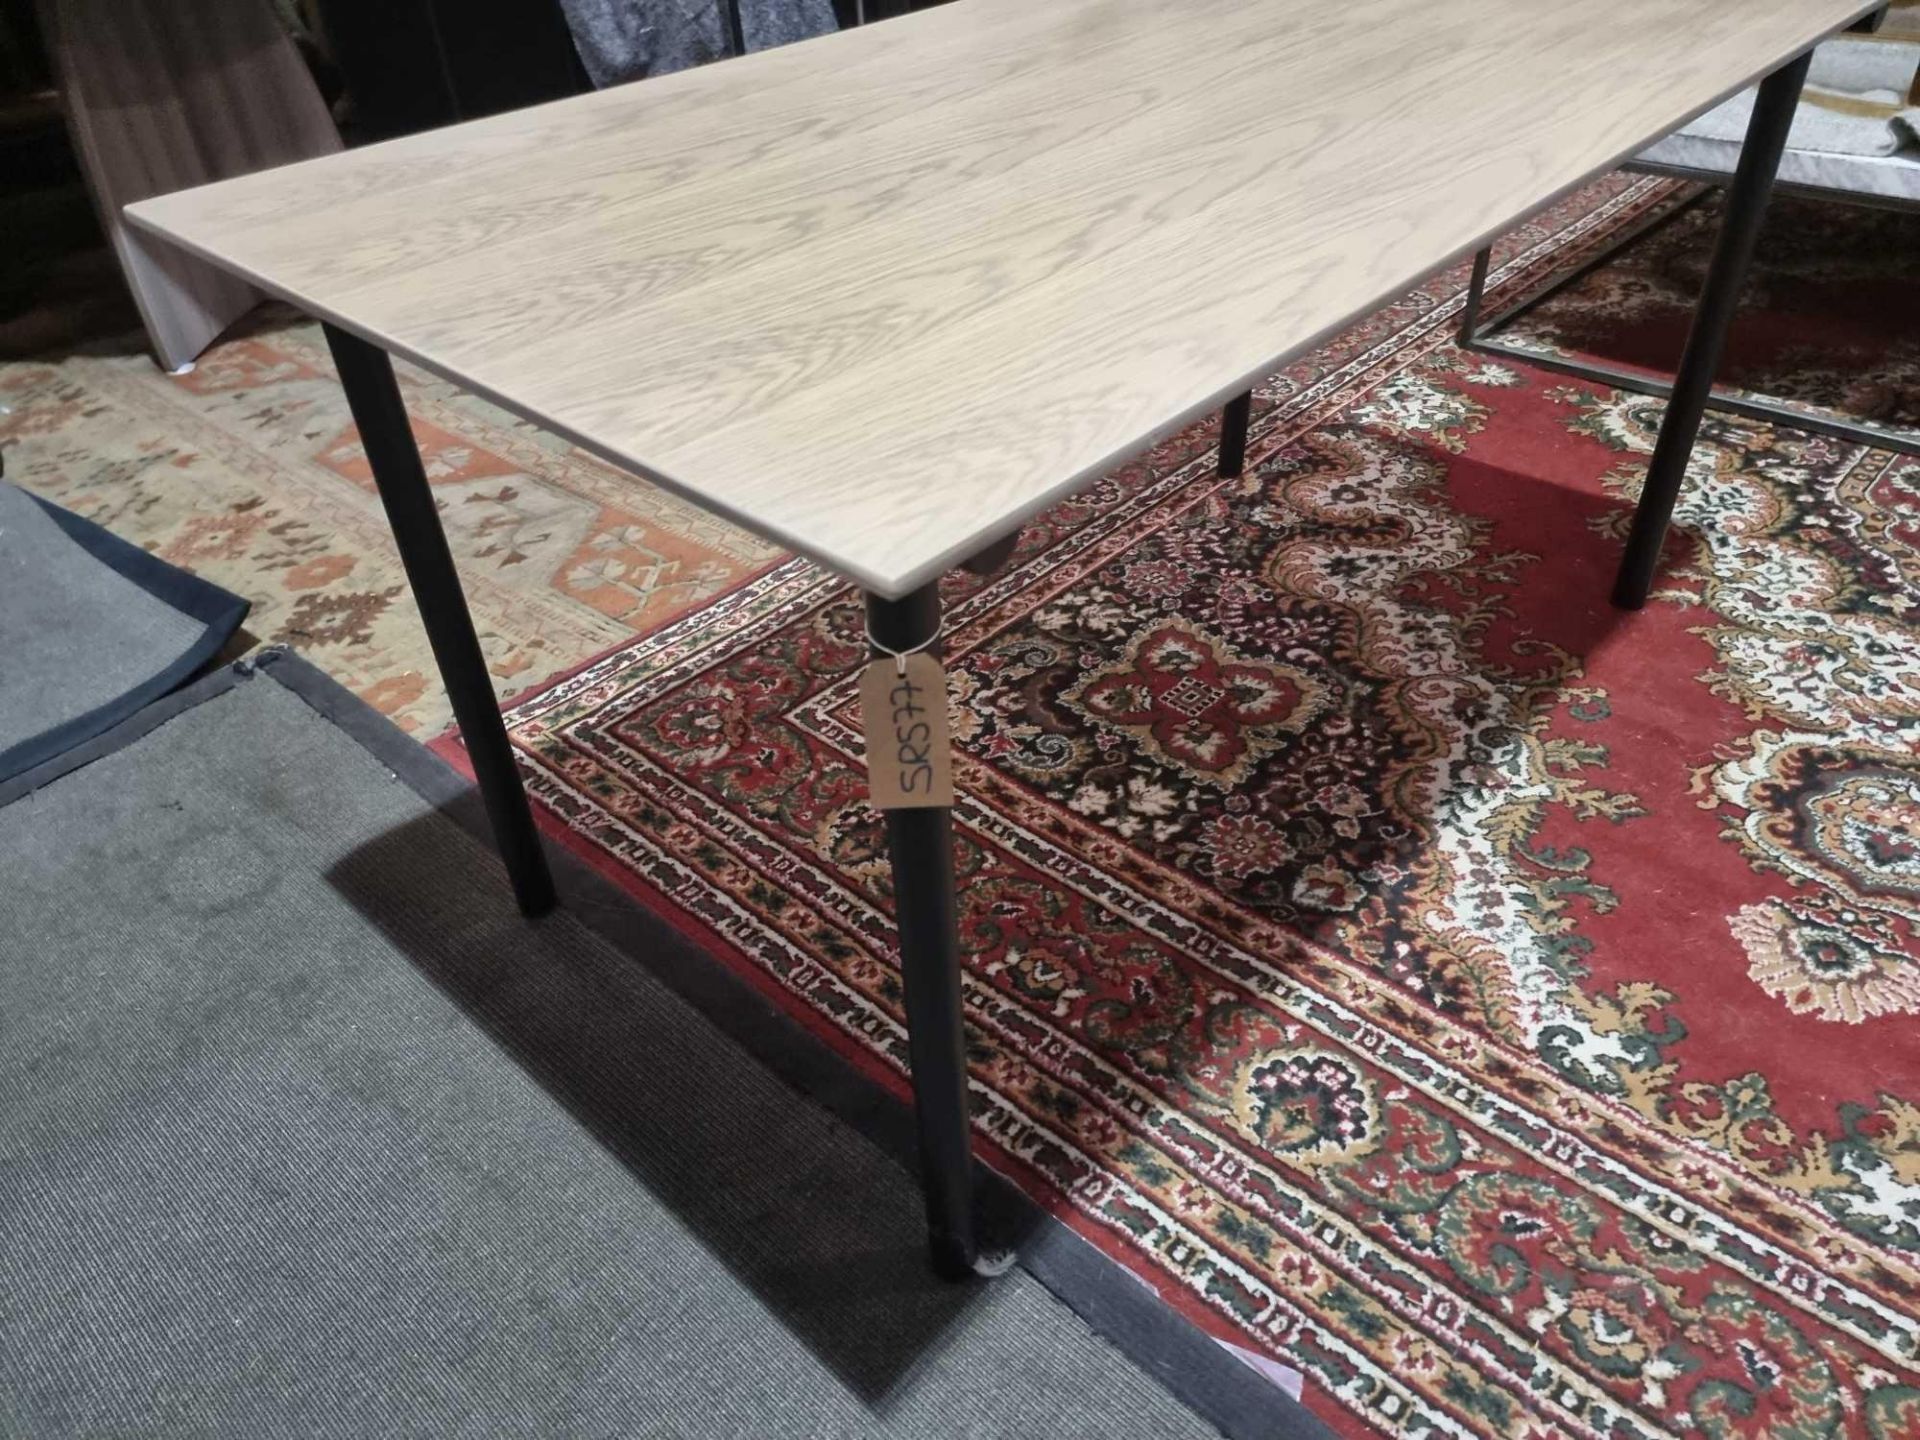 Modern Dining Table With Metal Frame Legs And Laminate Table Top Features A Modern Design With Its - Bild 4 aus 6